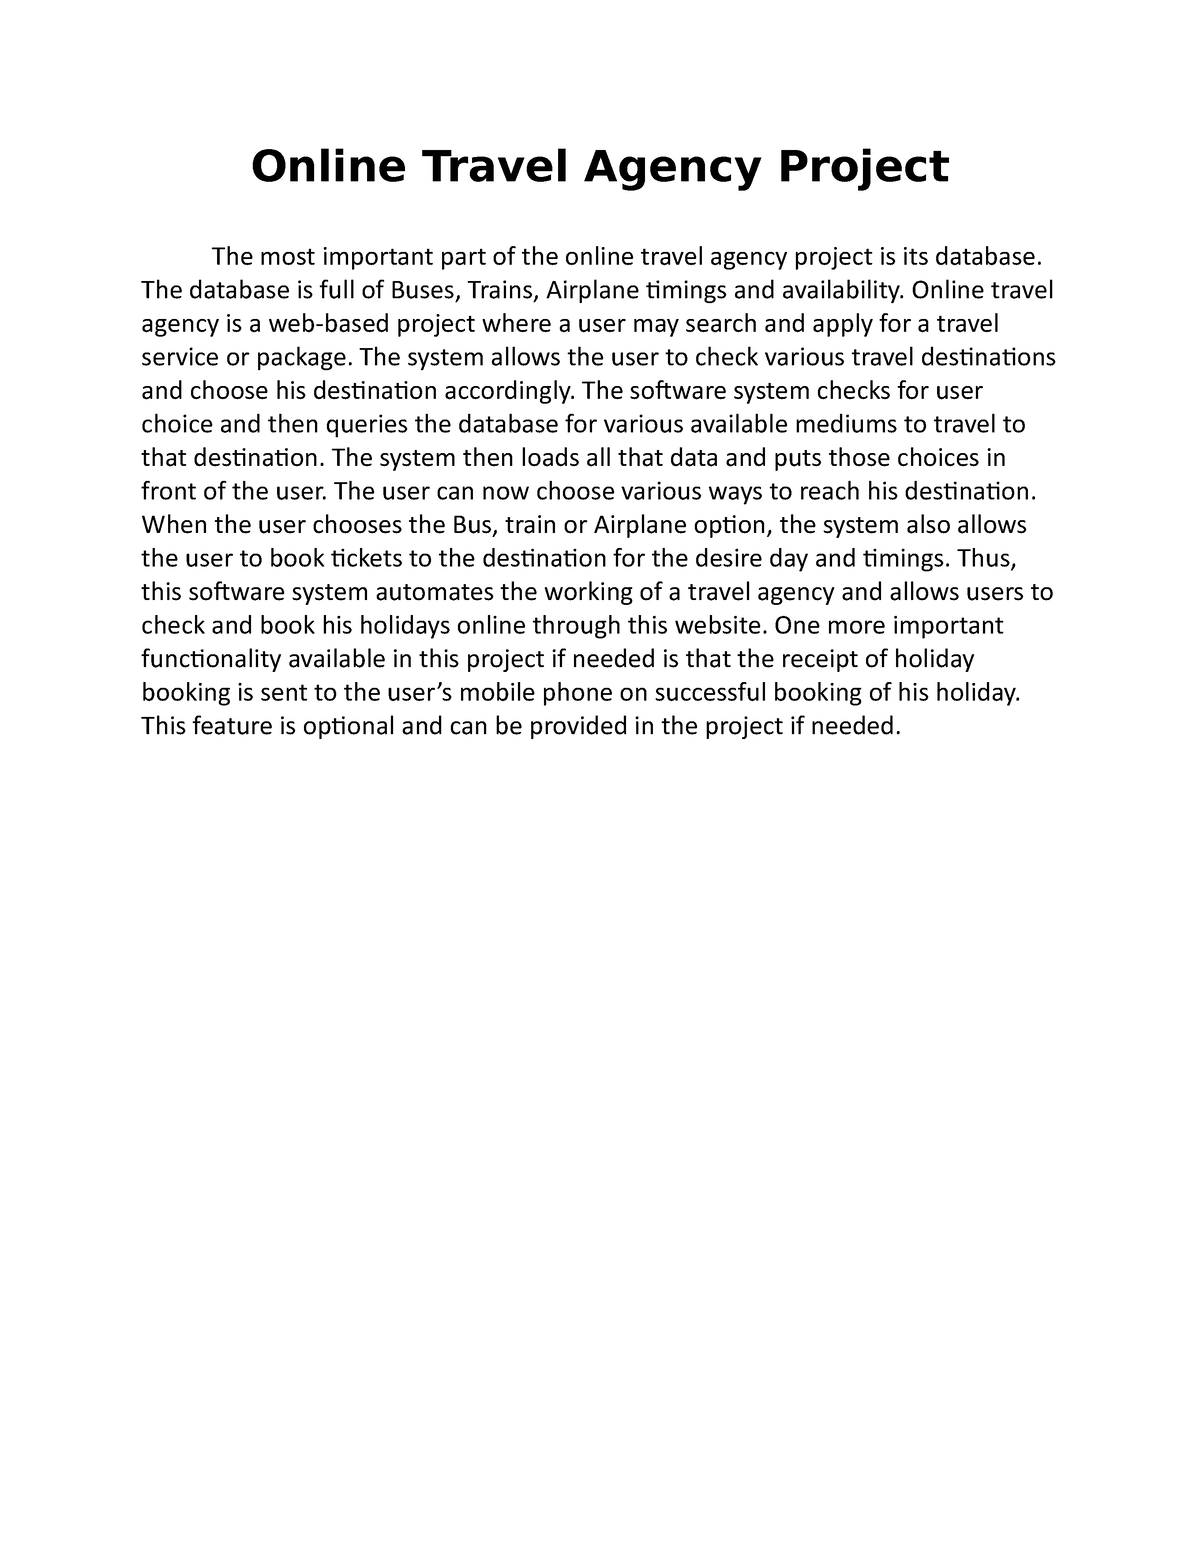 online travel agency project report pdf